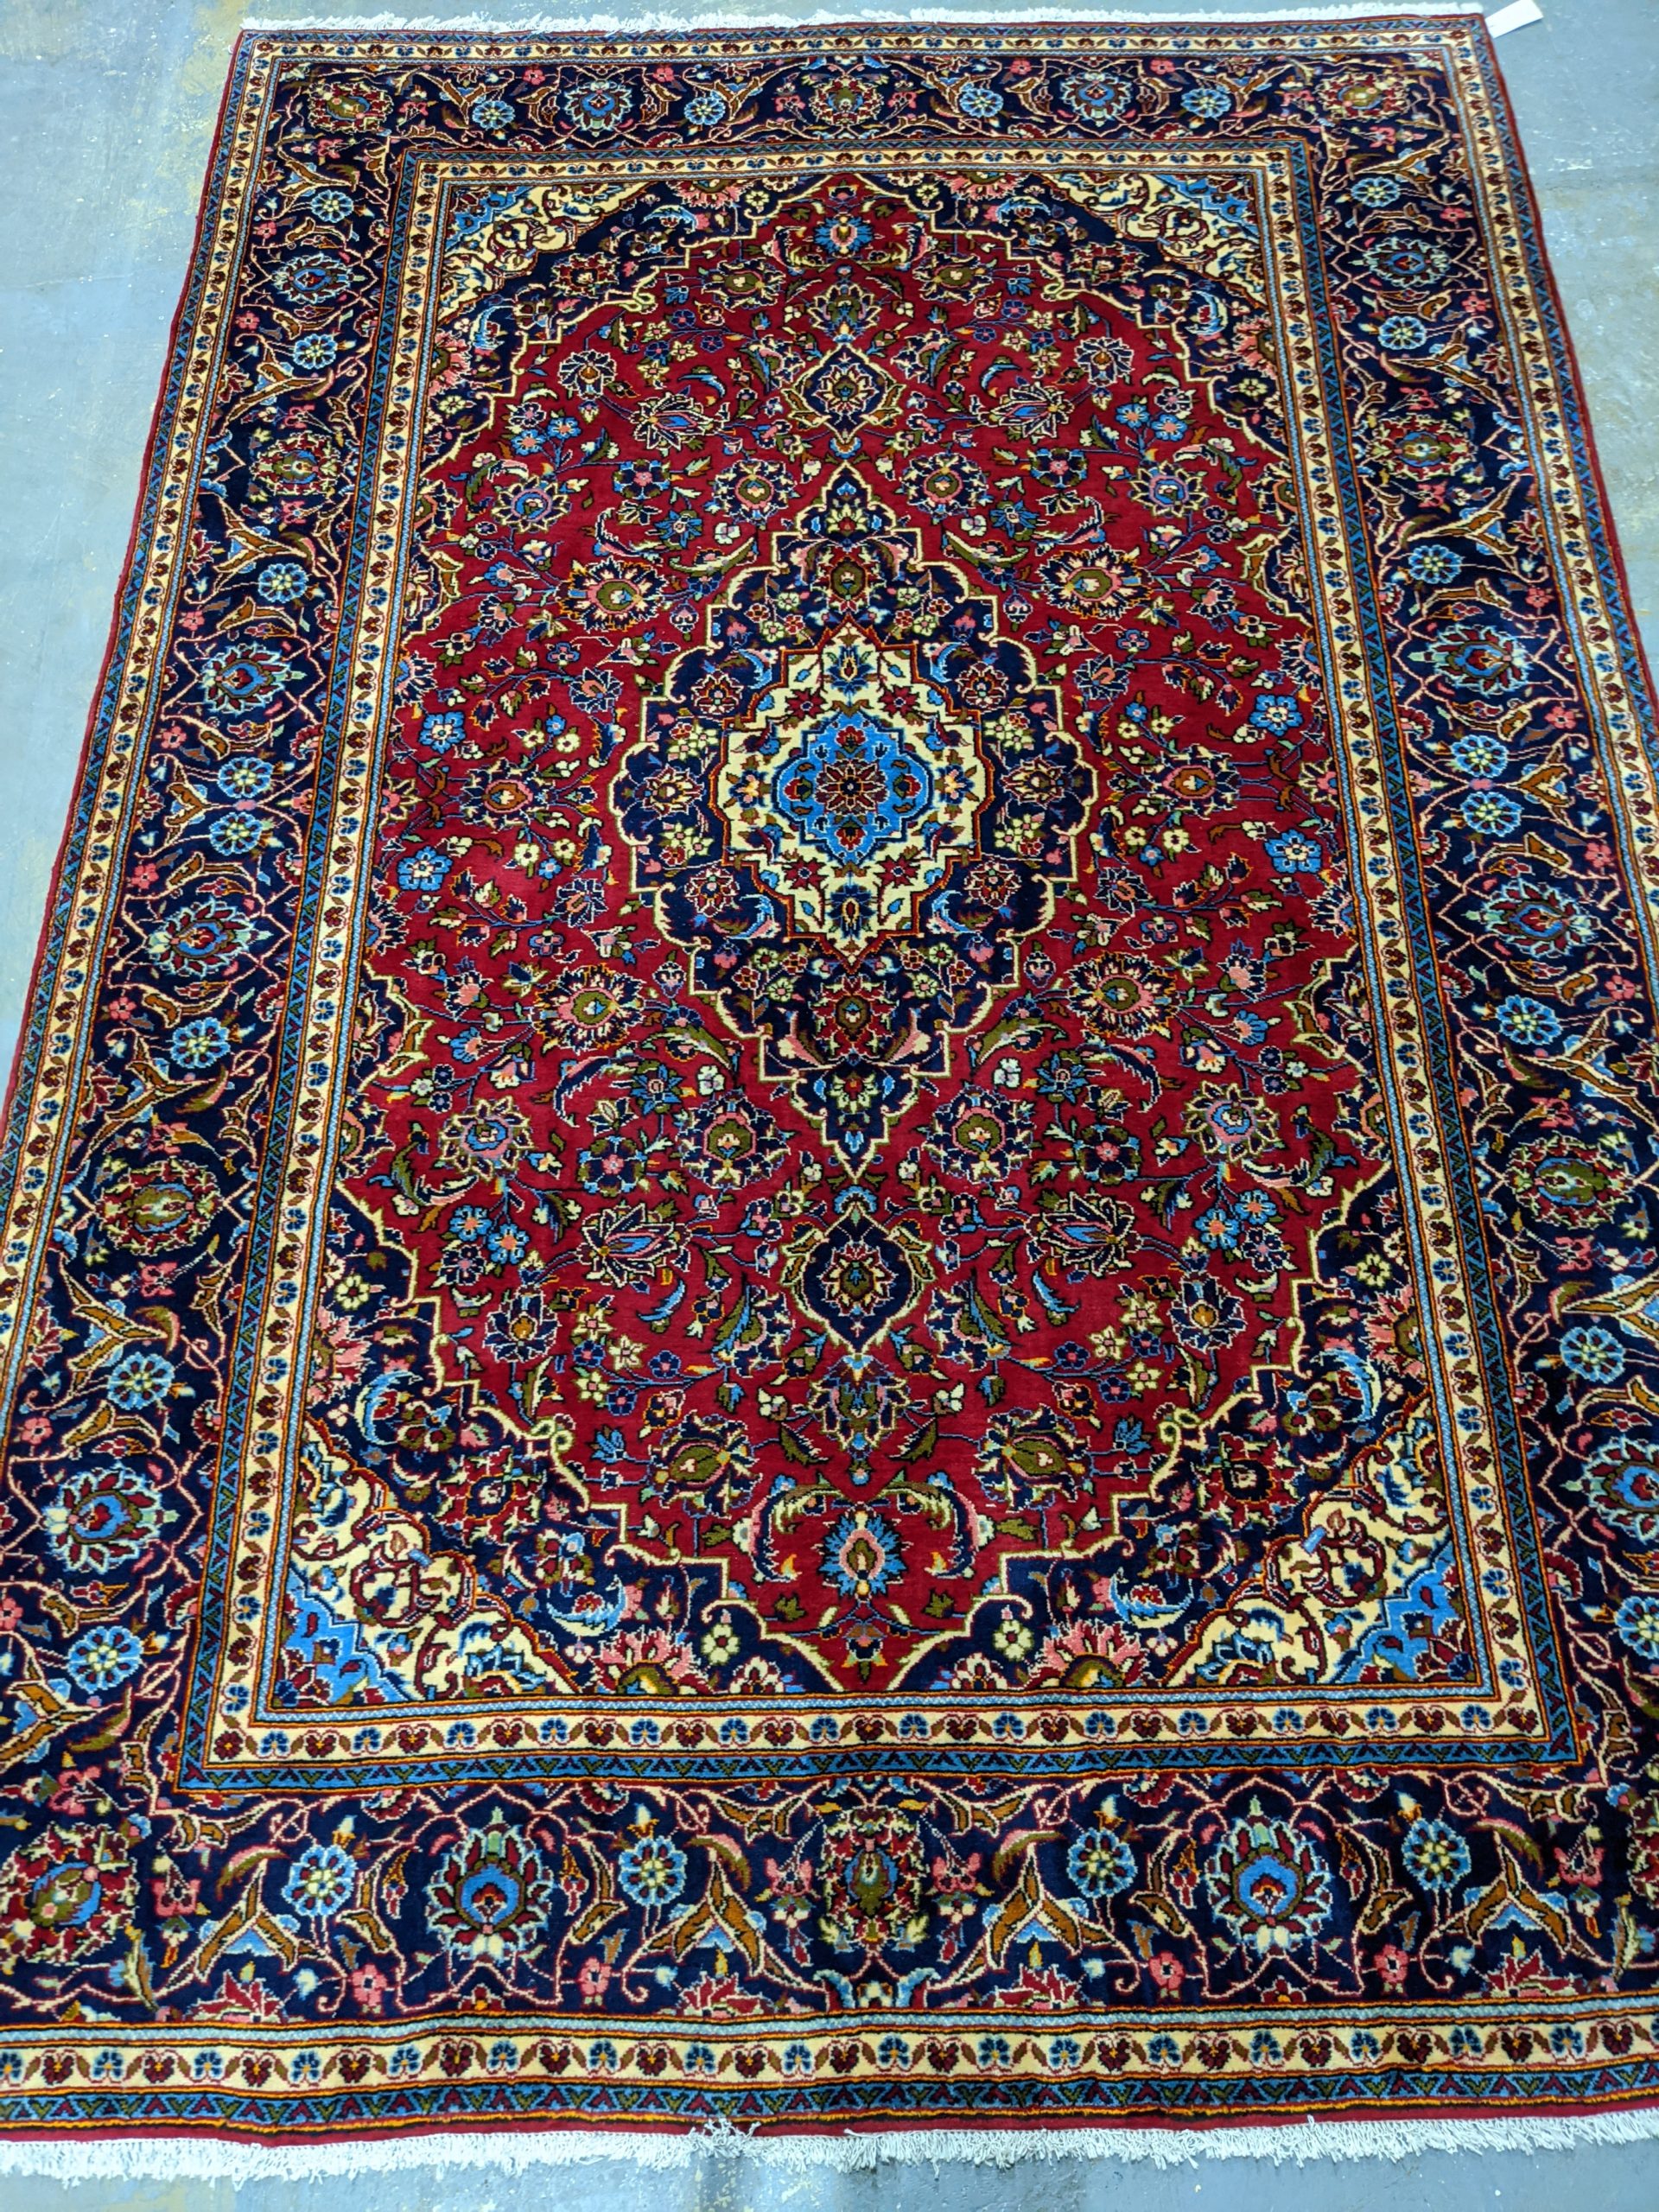 Hand-Knotted Kashan Persian Rug